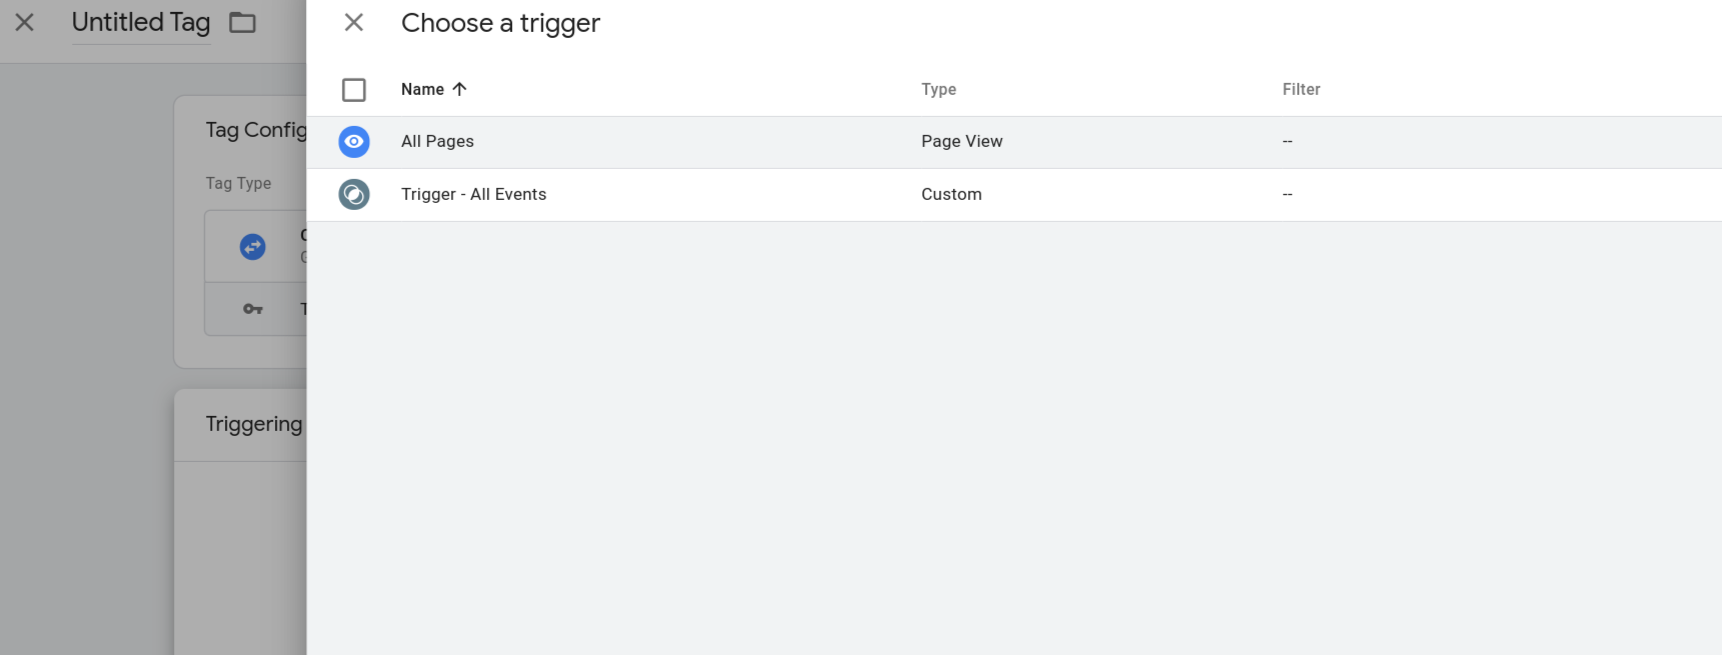 Choose trigger dialog with All pages trigger highlighted